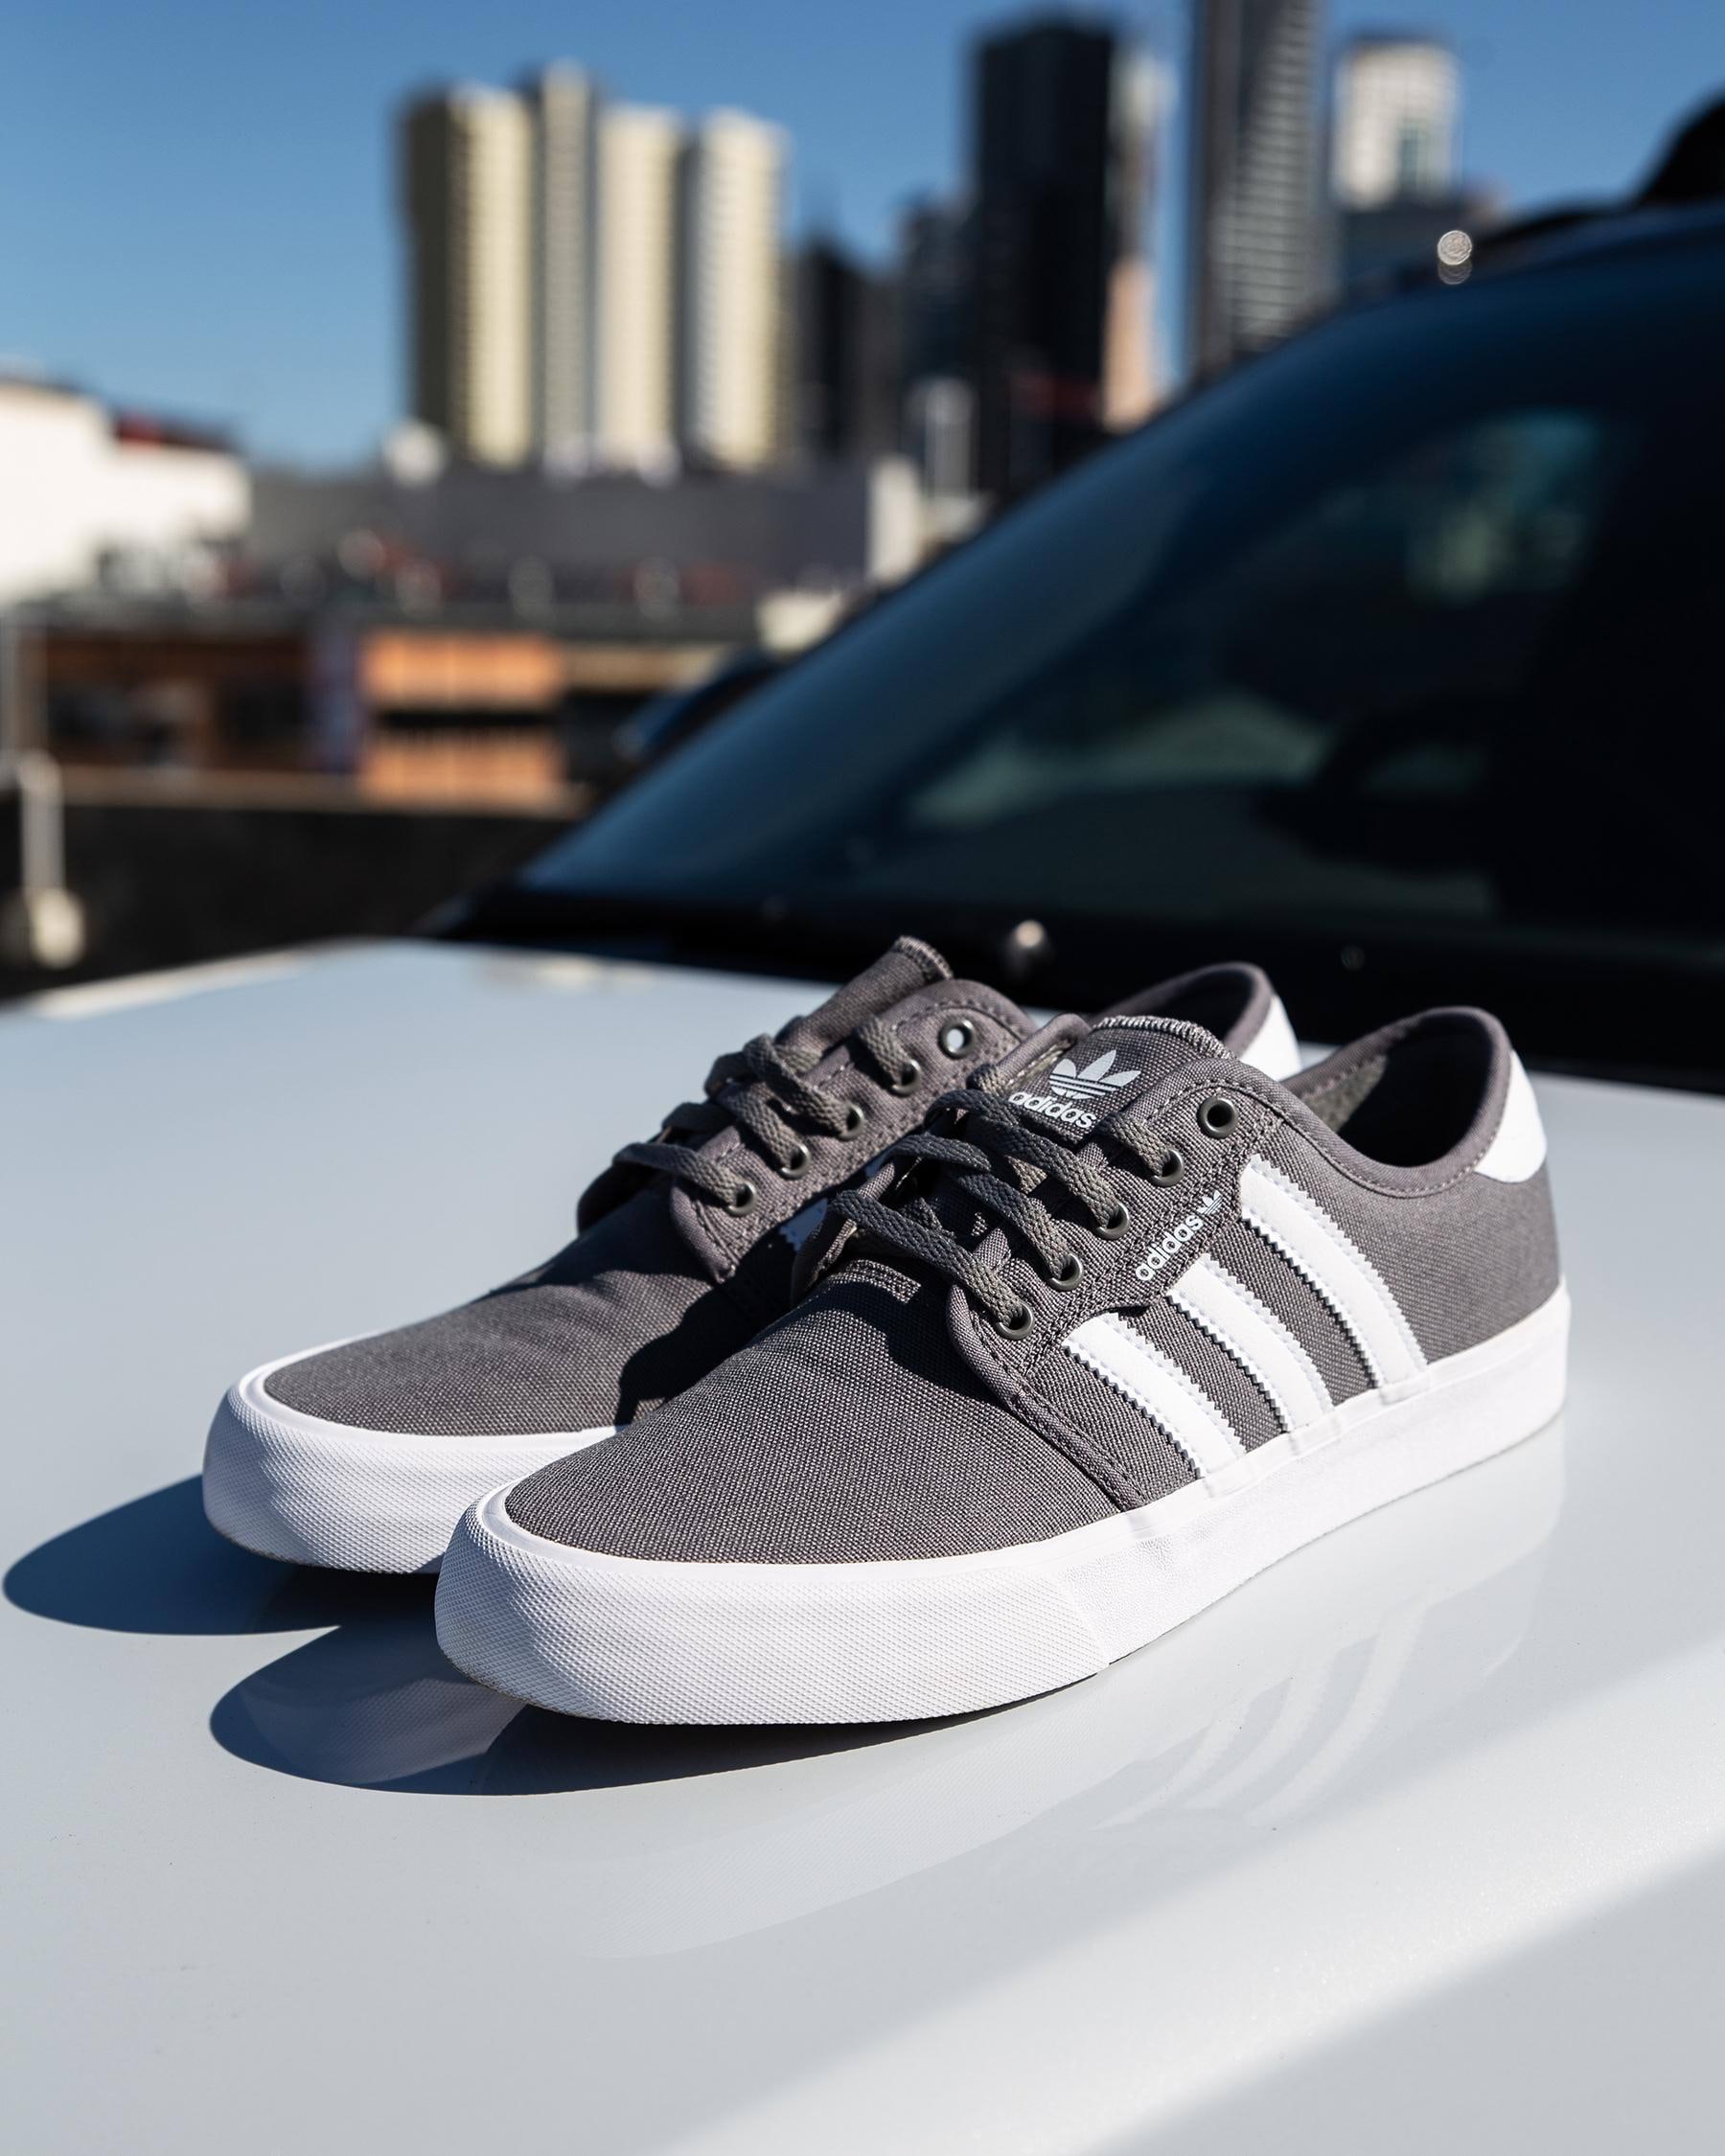 Shoes - States City Shipping In Returns - Easy Seeley United & Grey/white FREE* Adidas Beach XT